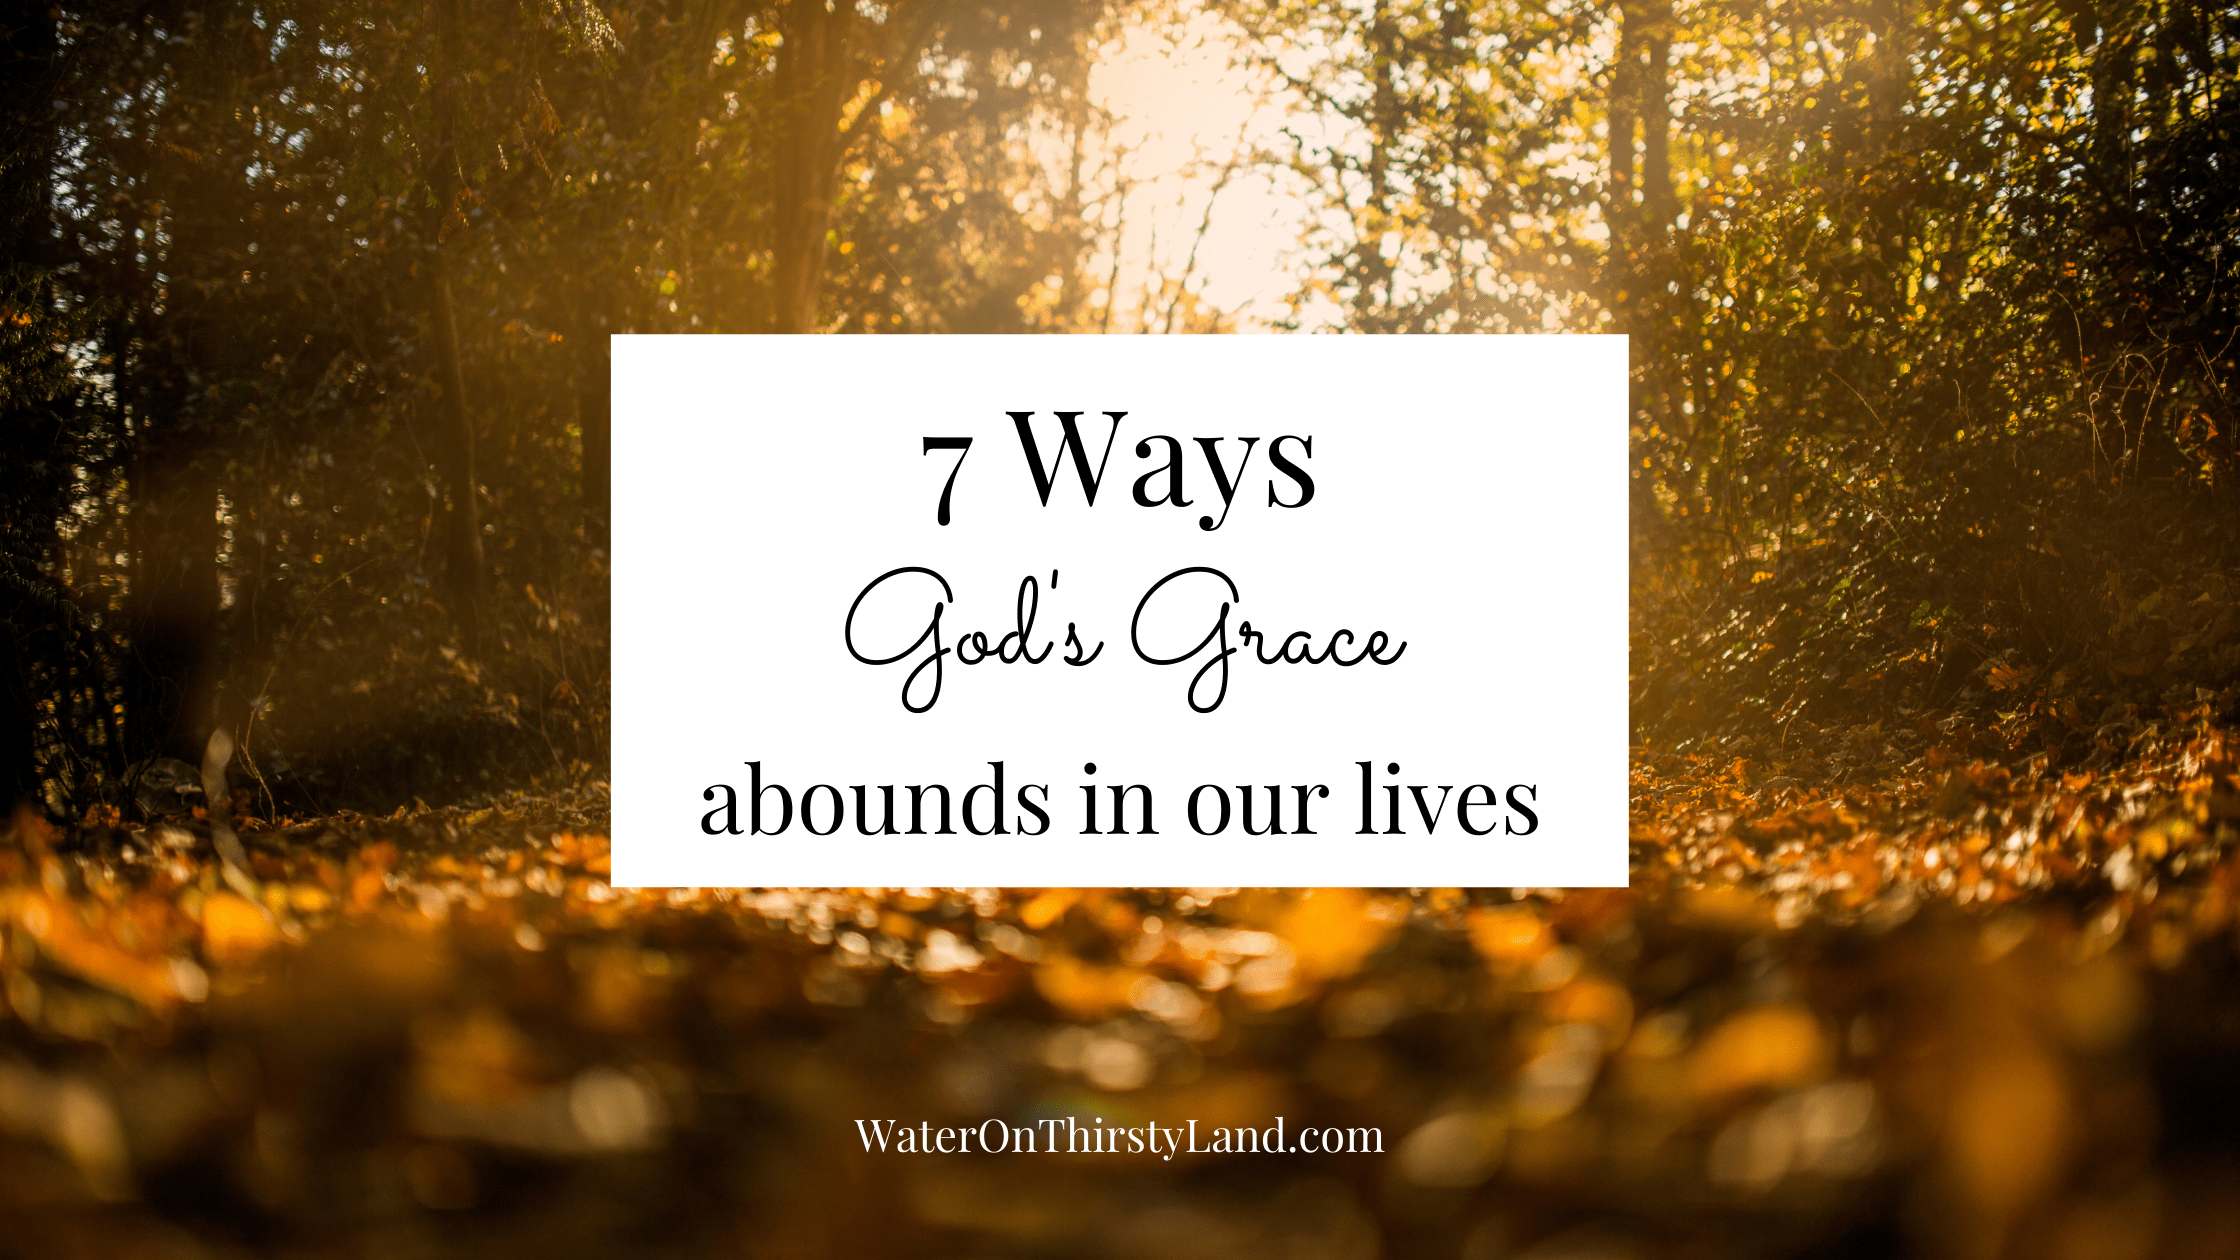 7 Ways God's Grace abounds in our lives